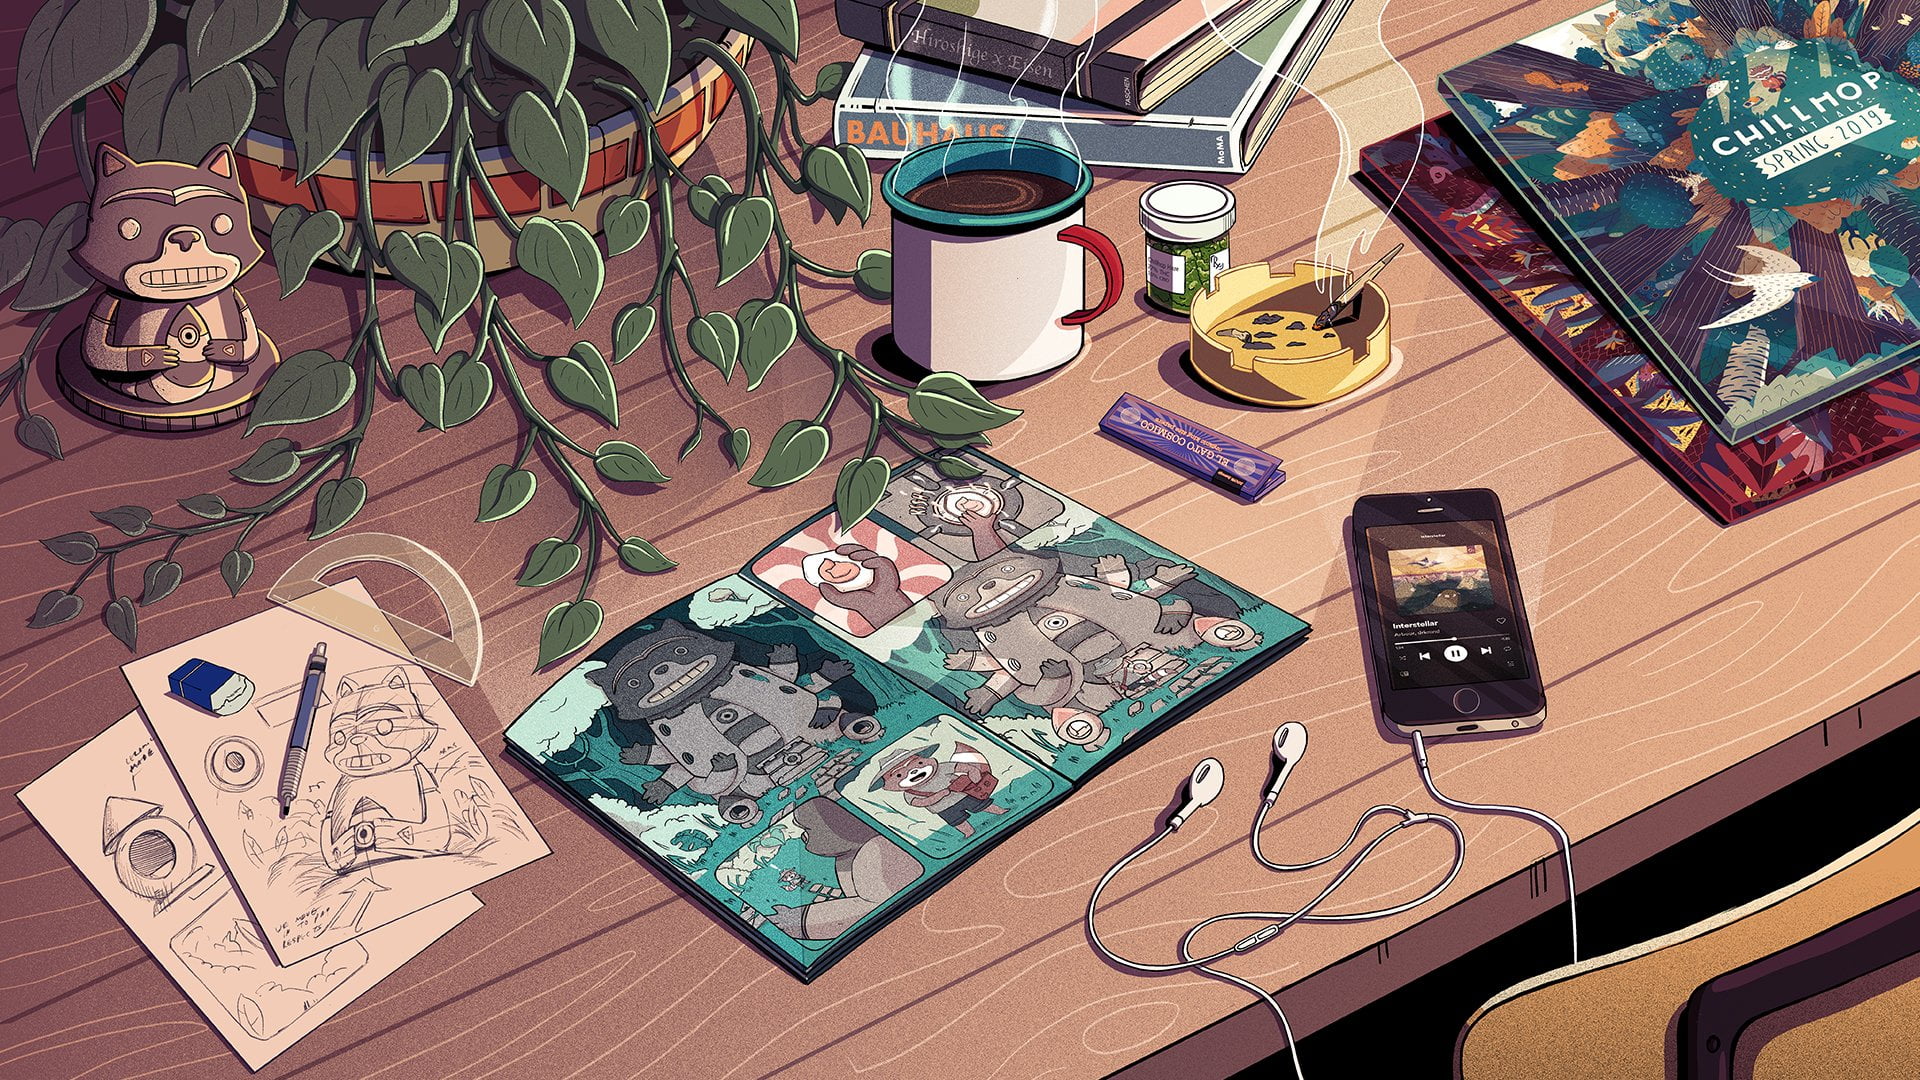 Chillhop Music, iPhone, desk, drawing, coffee, spotify